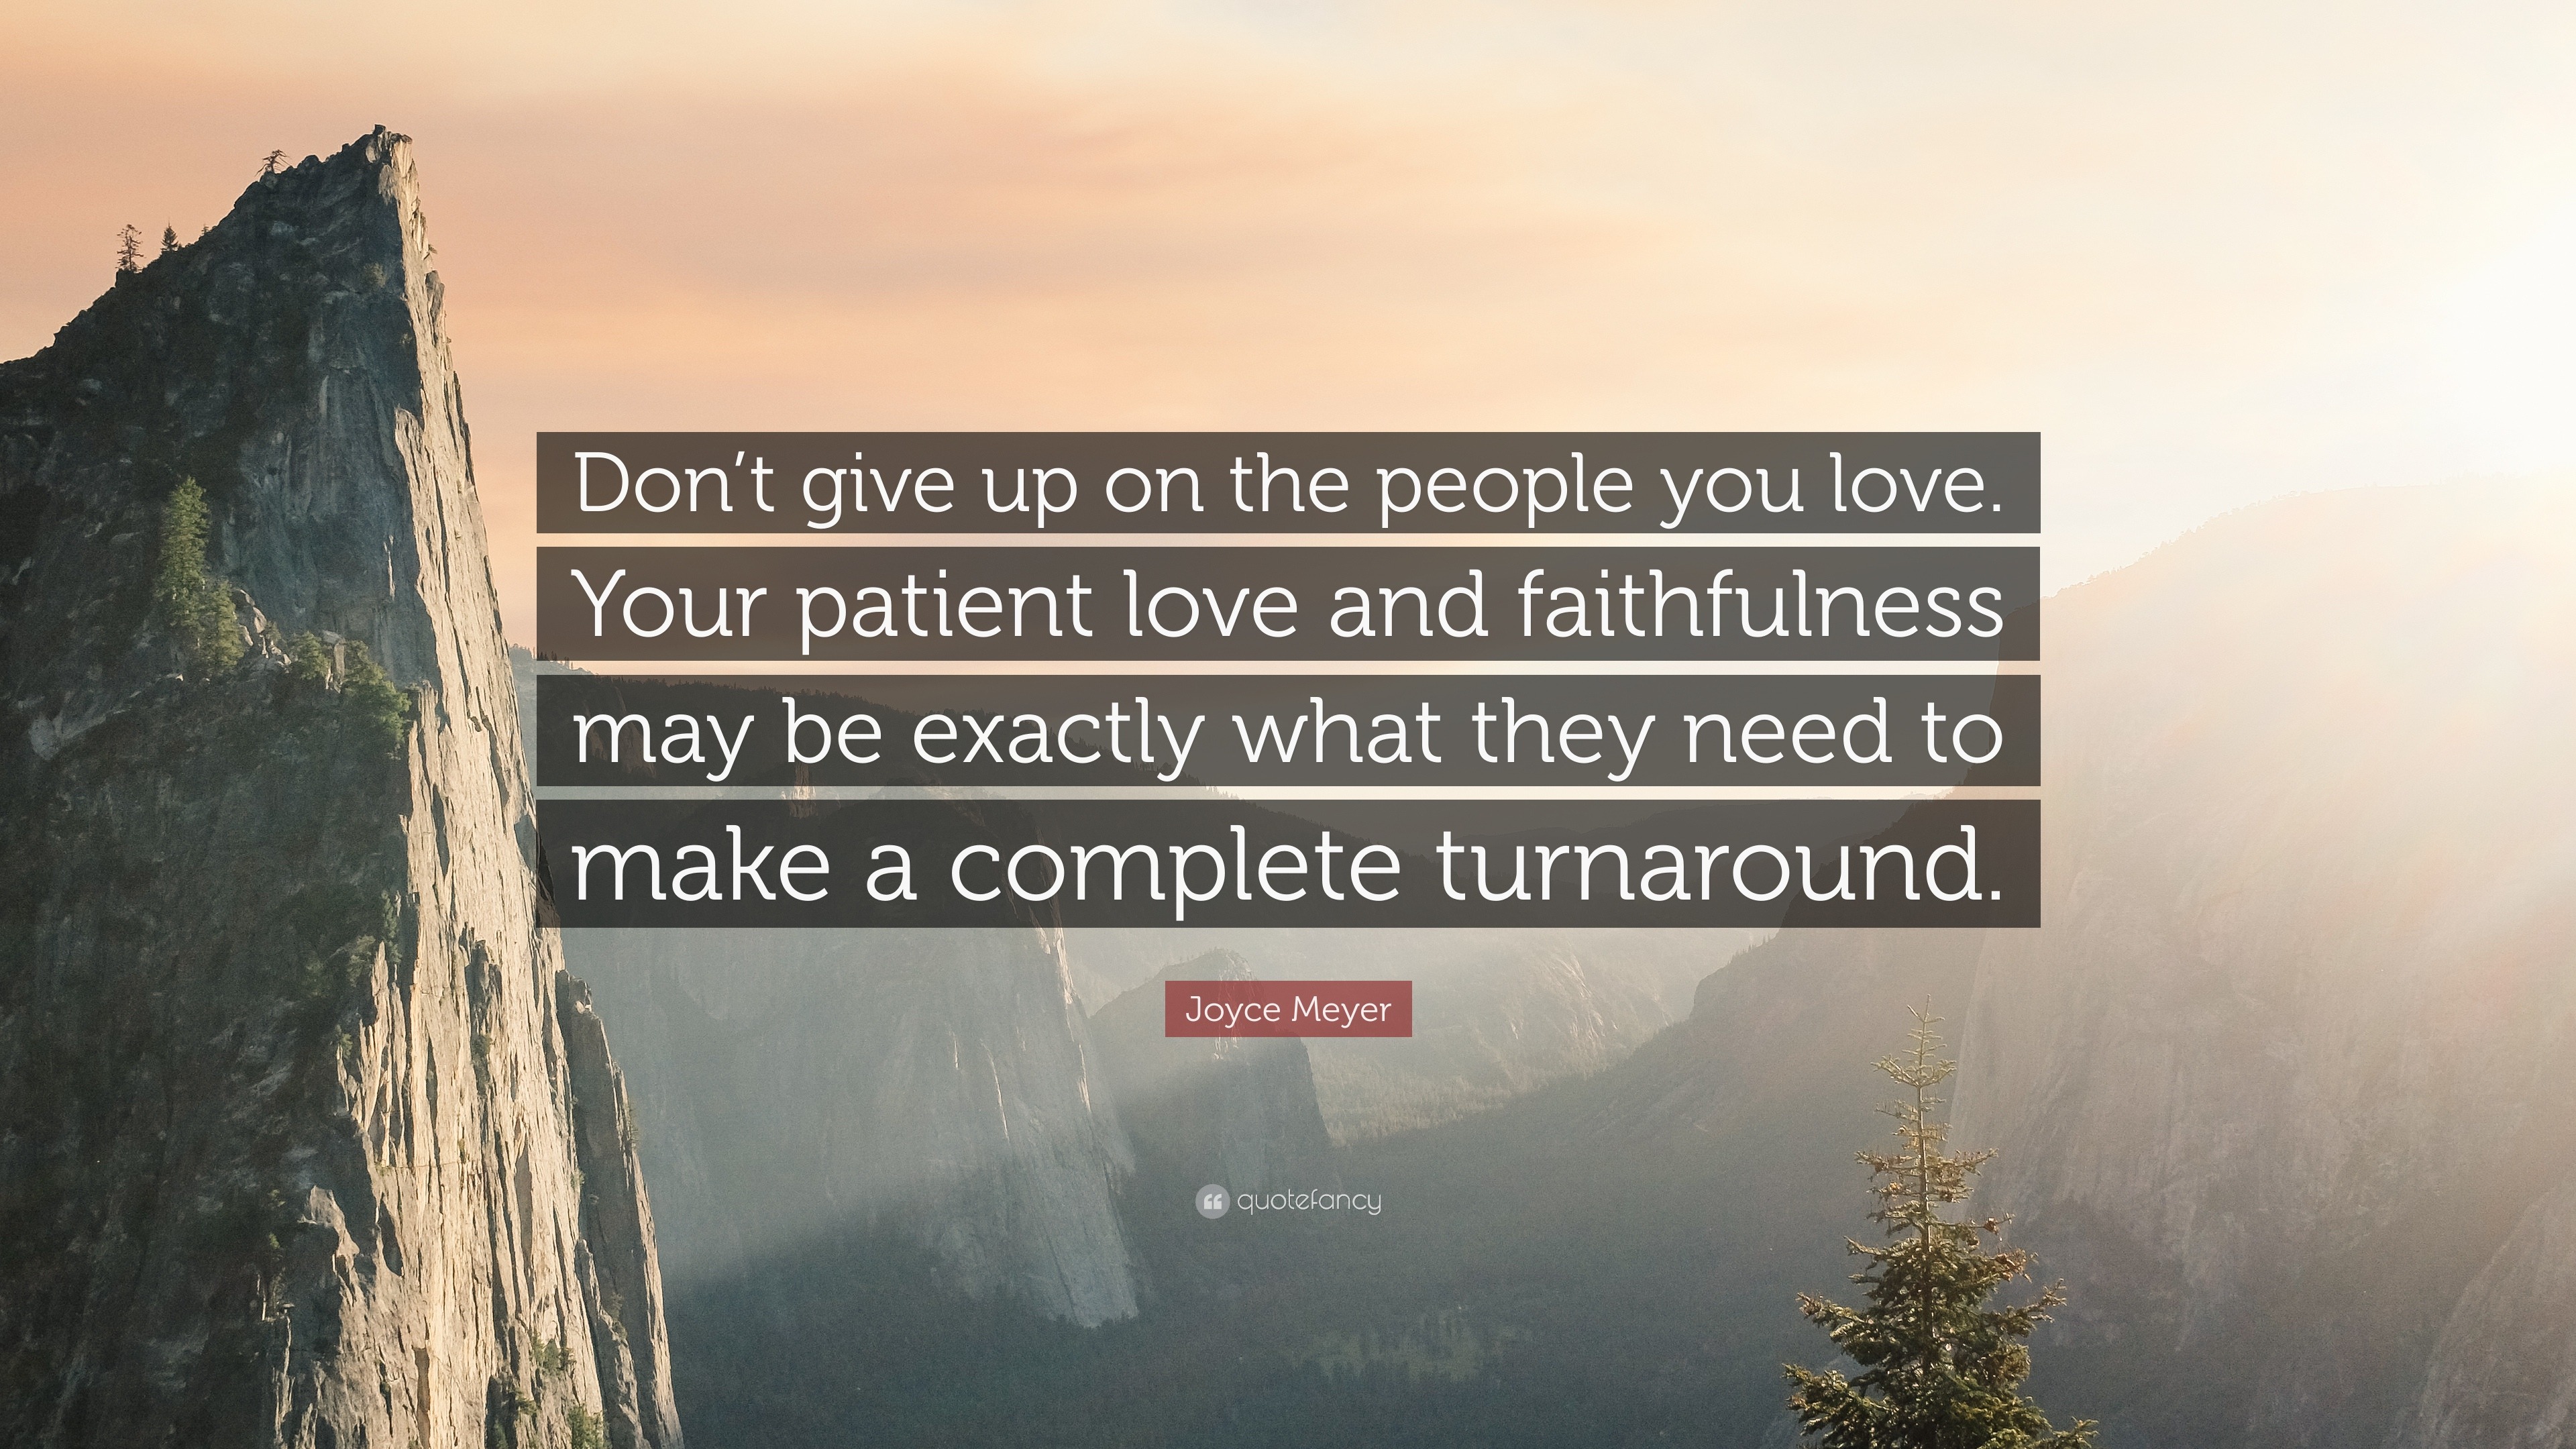 Joyce Meyer Quote “Don t give up on the people you love